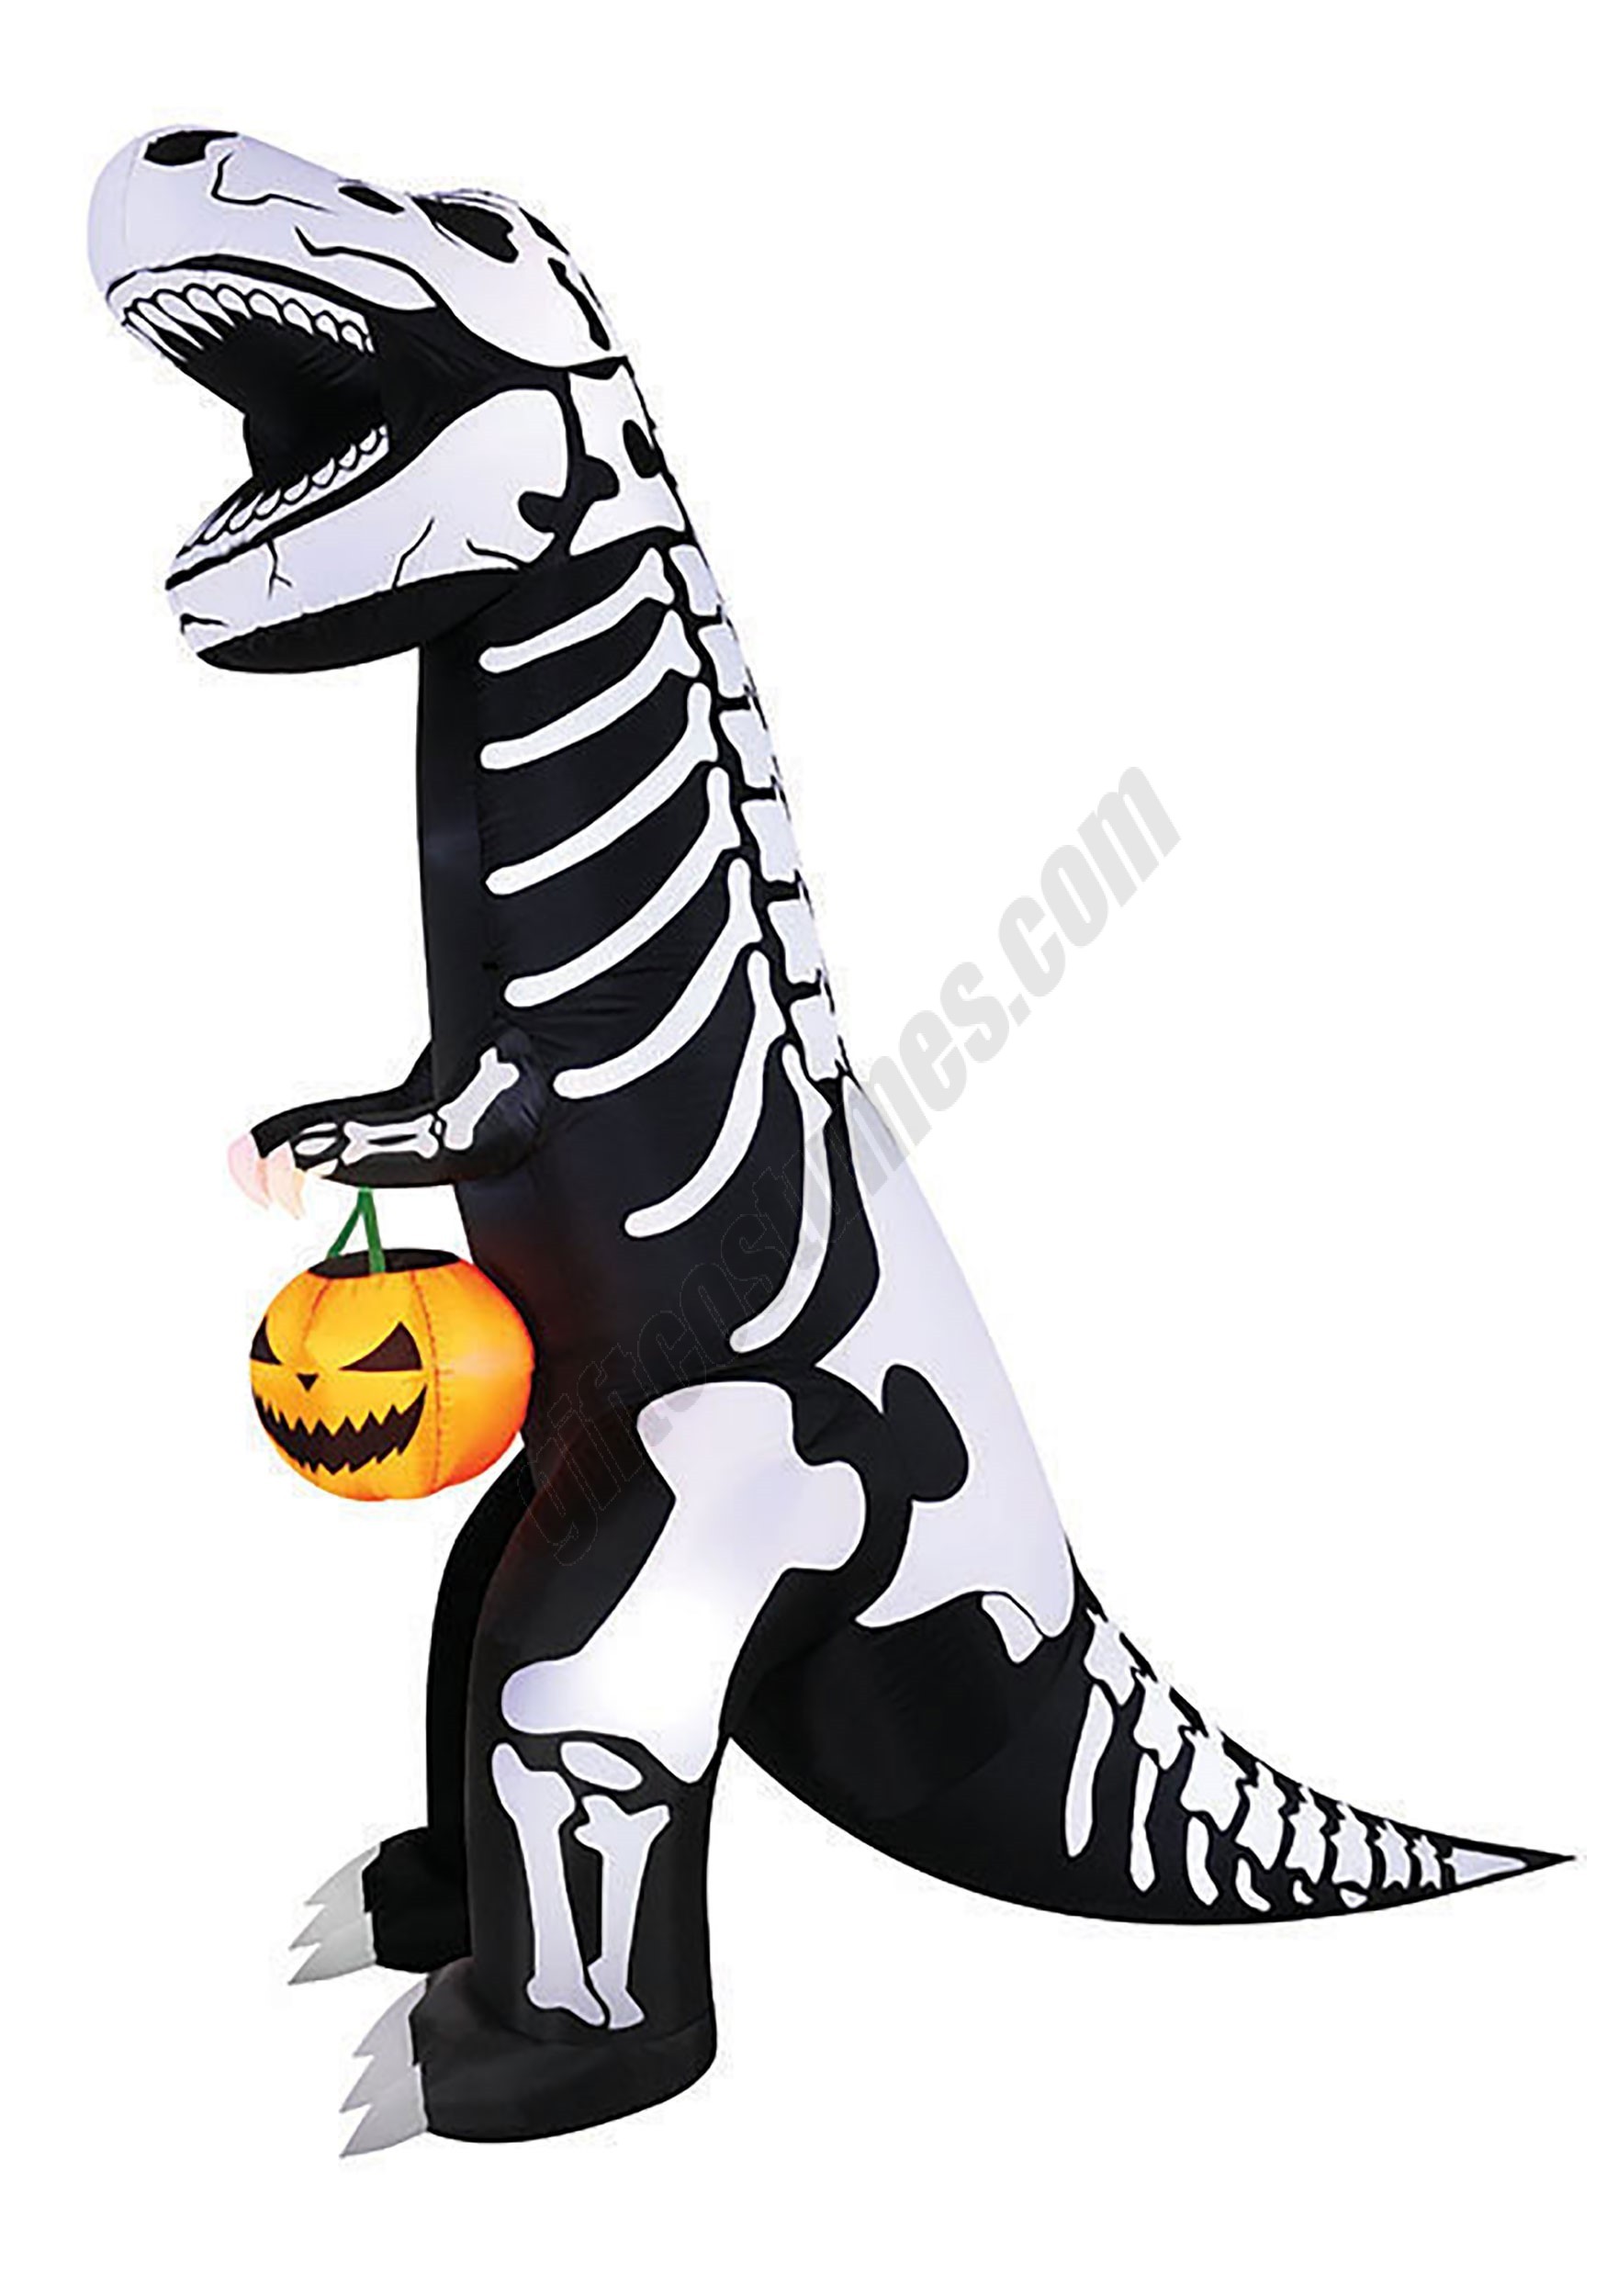 T-Rex Skeleton with Pumpkin Inflatable Promotions - T-Rex Skeleton with Pumpkin Inflatable Promotions